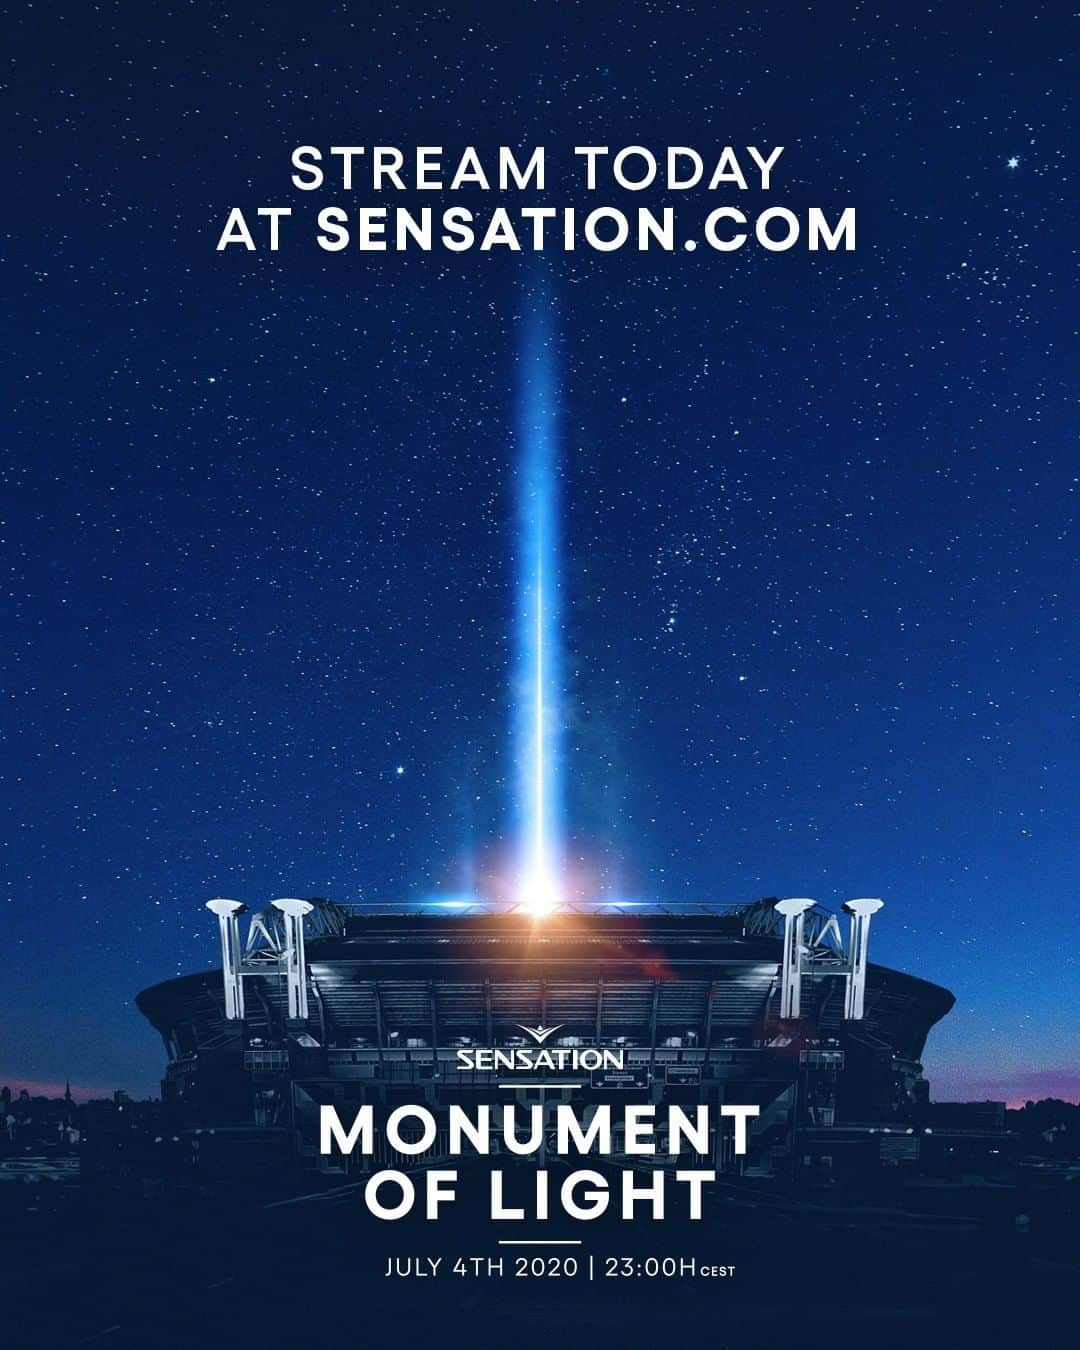 Sensationのインスタグラム：「Today Beyond Sensation should have taken place in Amsterdam's Johan Cruijff ArenA. Even though we can't see each other physically, we're inviting you to connect with us as one family. Stream the Monument of Light, starting at 23:00h (CEST) today at sensation.com.​ ​ Enjoy the show from all over the world:​​ Amsterdam - 23:00​ London - 22:00 São Paulo - 18:00 New York - 17:00 Los Angeles - 14:00 Melbourne - 08:00 (+1) Tokyo - 06:00 (+1) Bangkok - 04:00(+1) Mumbai - 03:00 (+1) Moscow - 00:00 (+1)  #Sensation #BeyondSensation #JohanCruijffArenA #celebratelife #MonumentofLight」